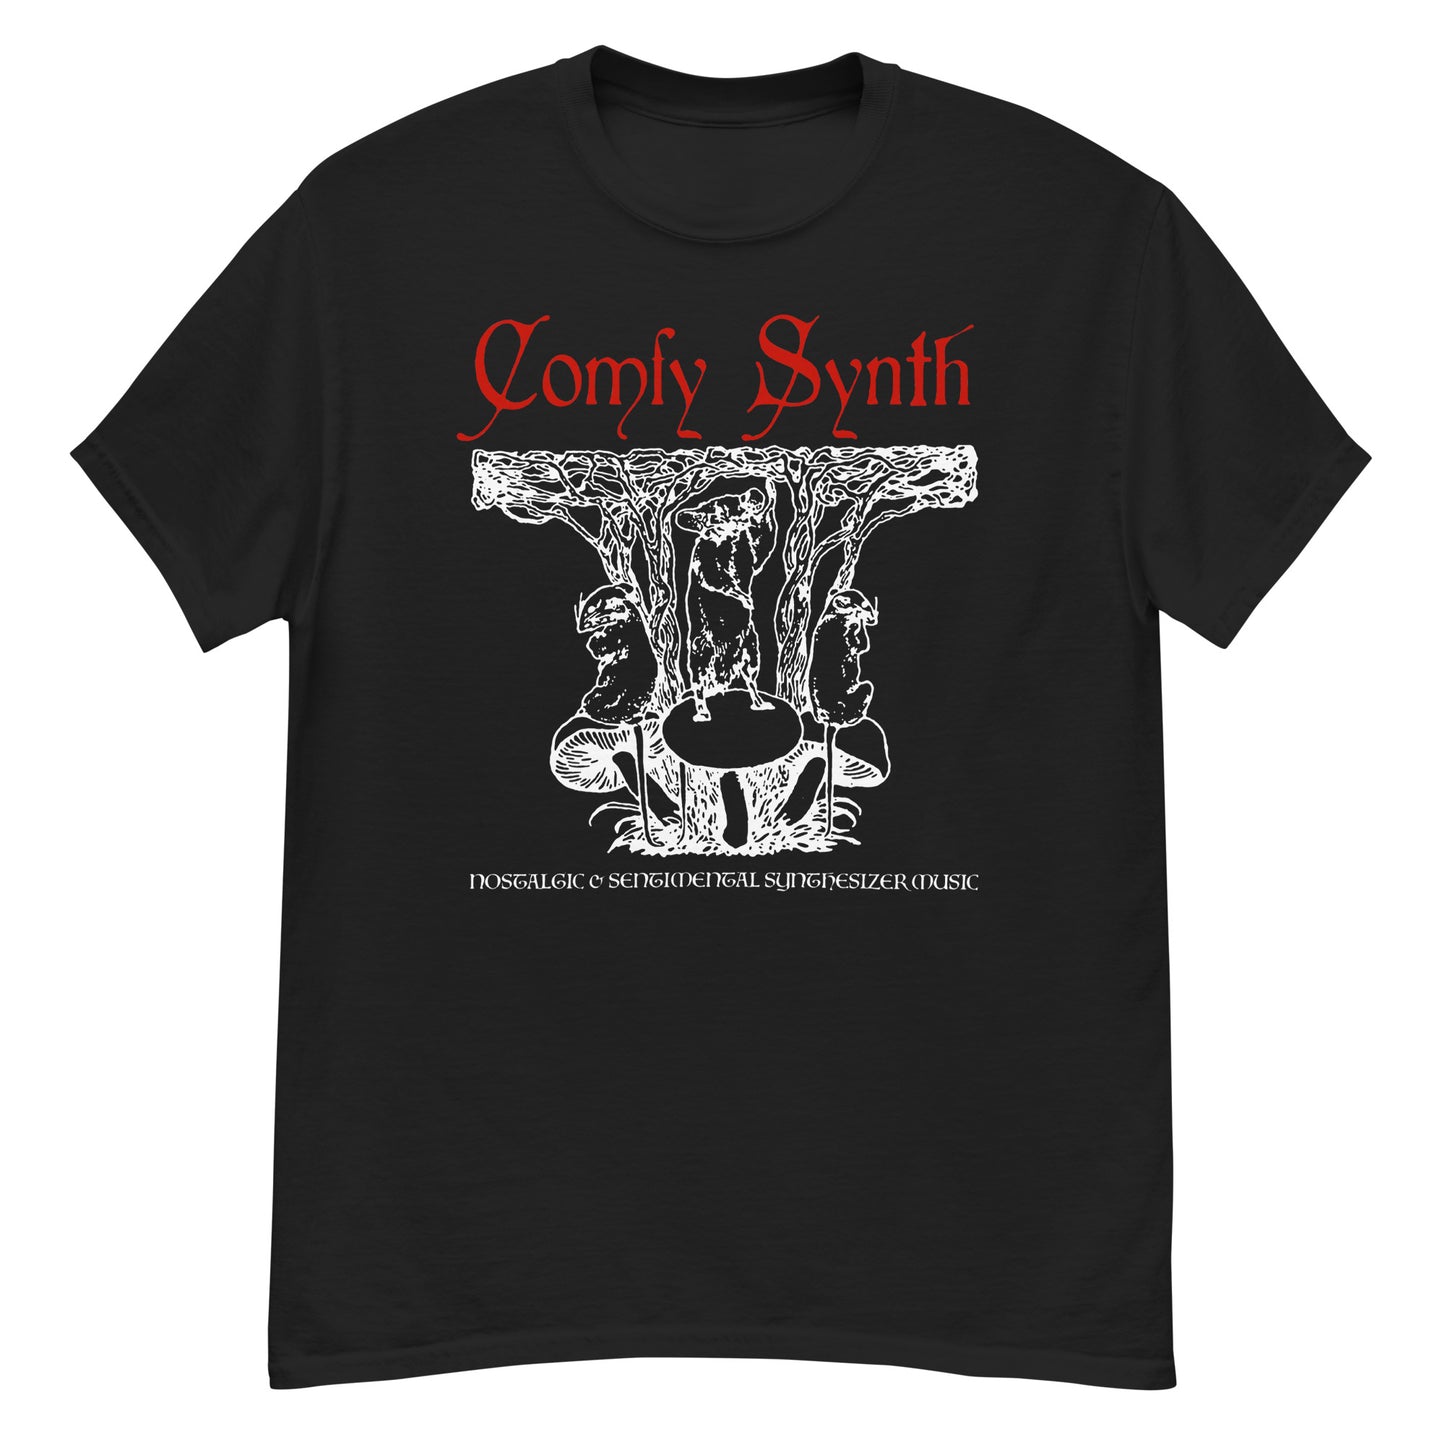 Comfy Synth T-Shirt (Metalhead style)